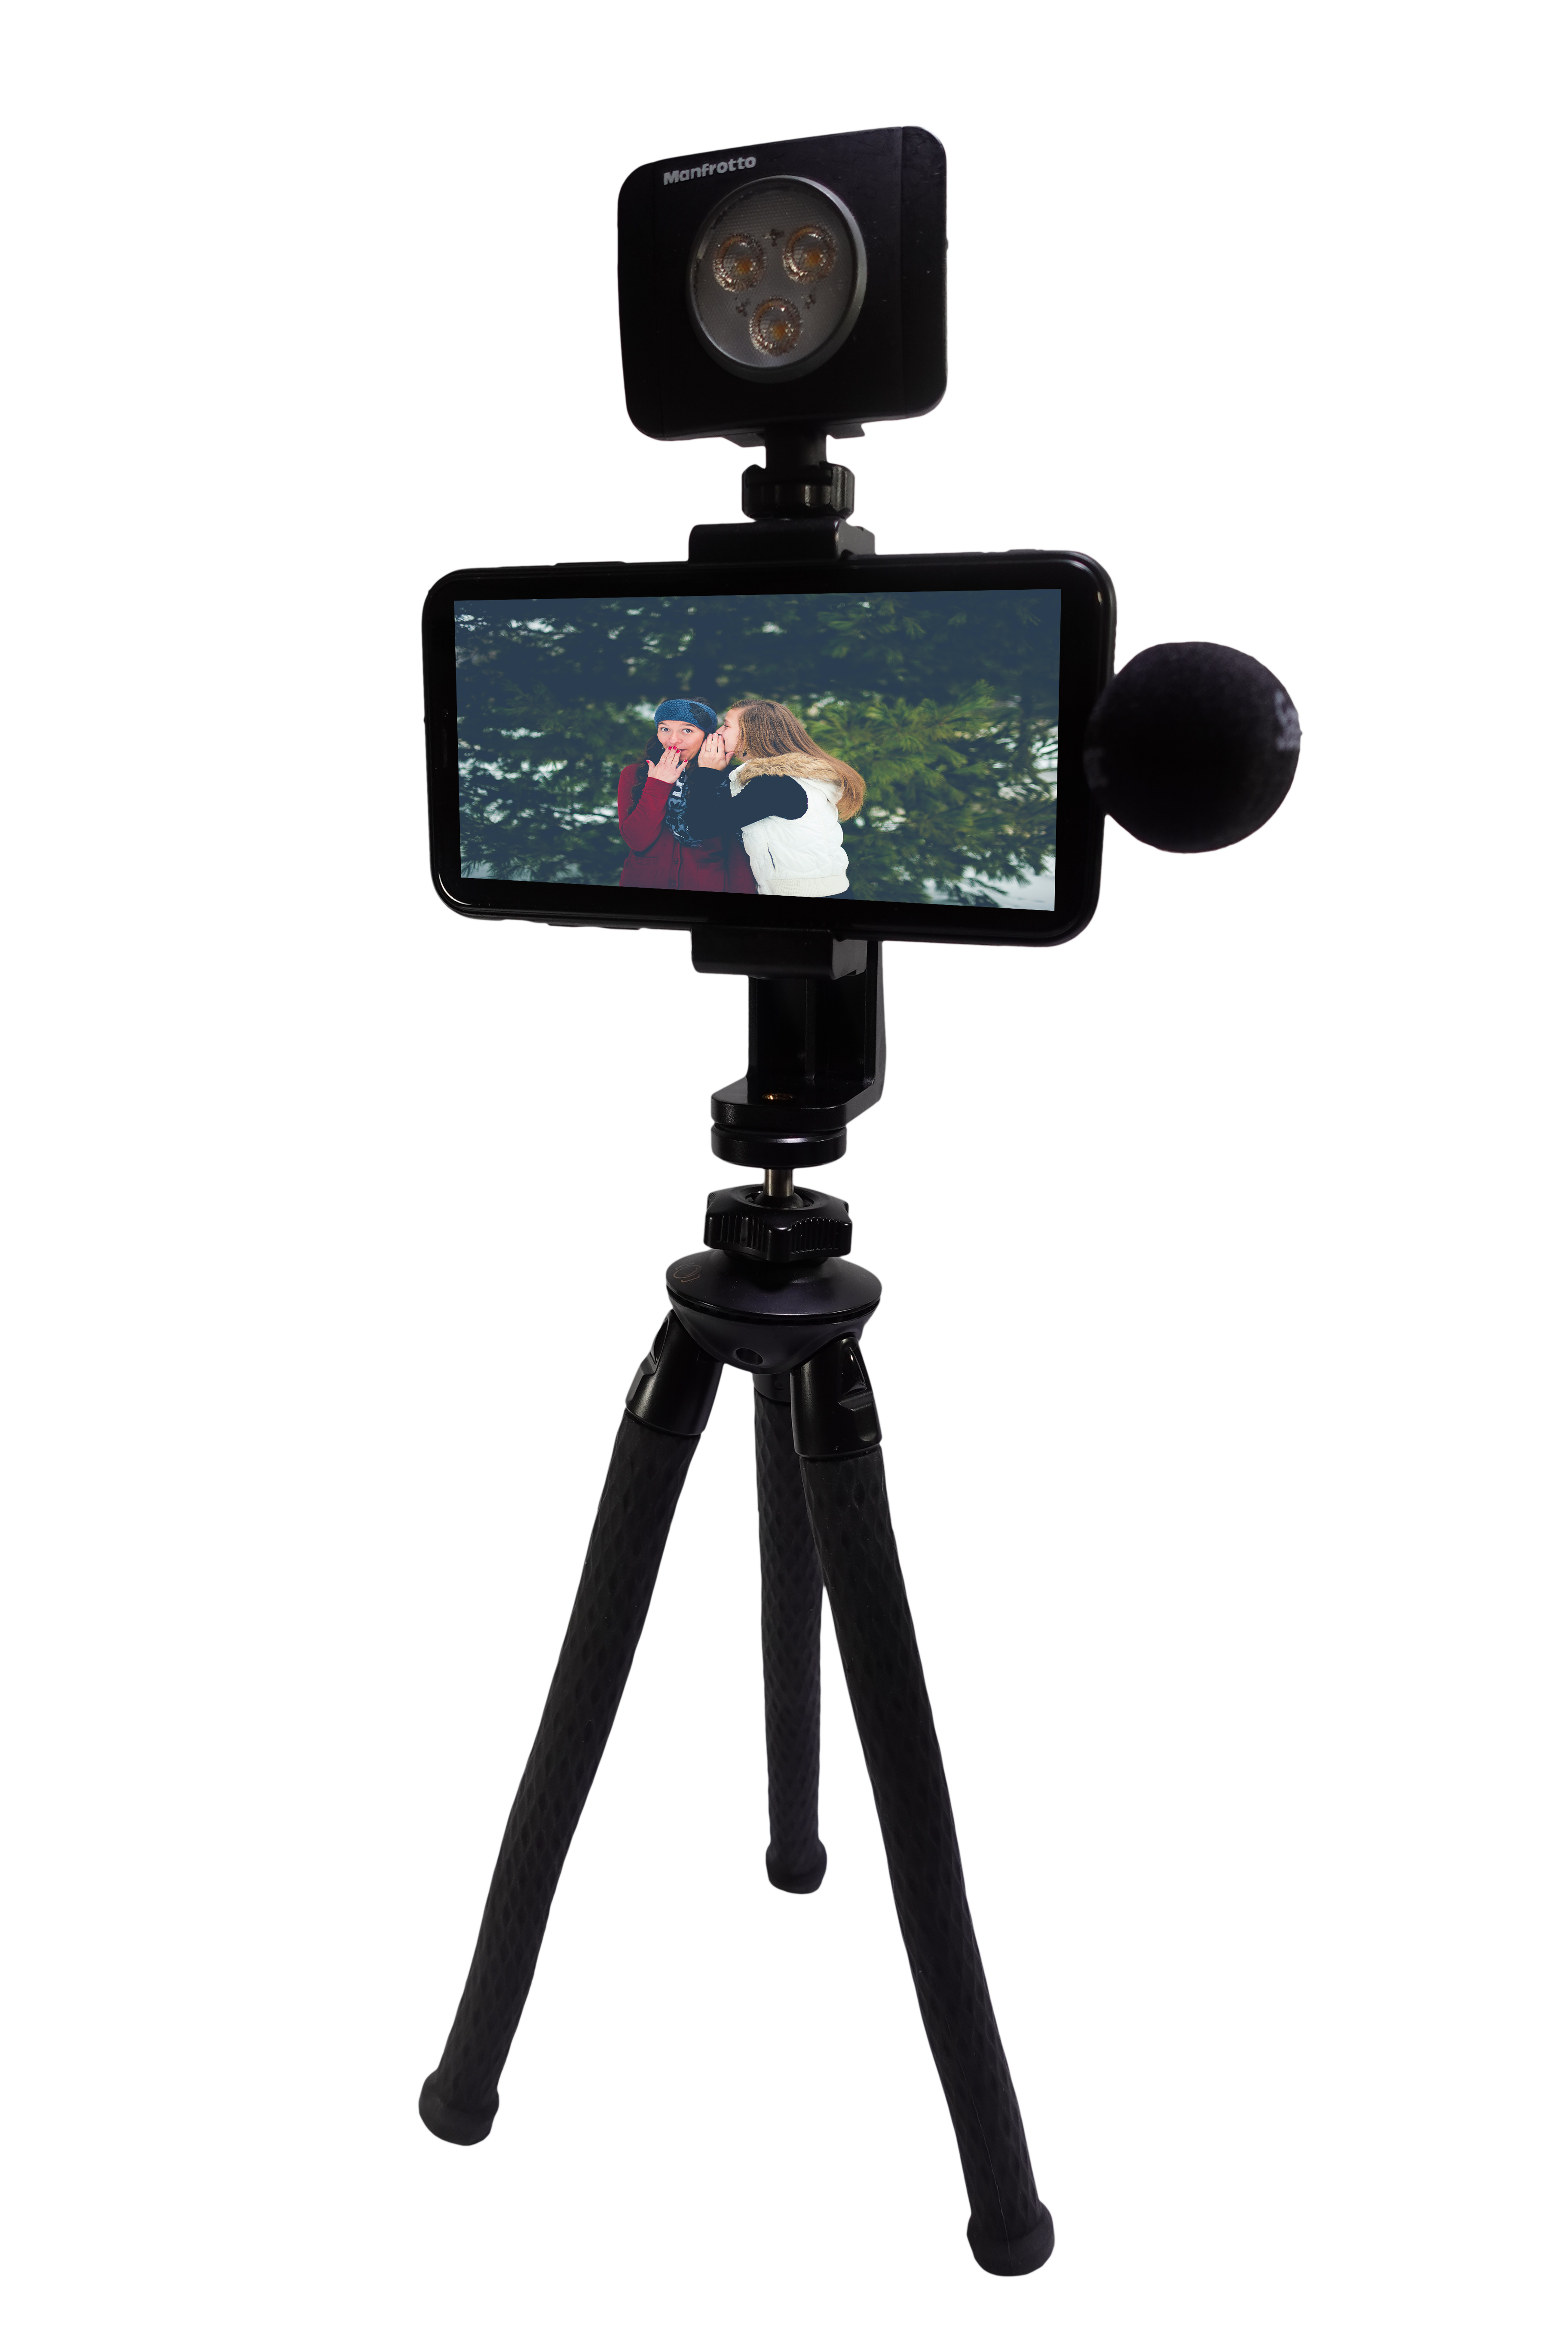 Vlogger Kit for Android Phones